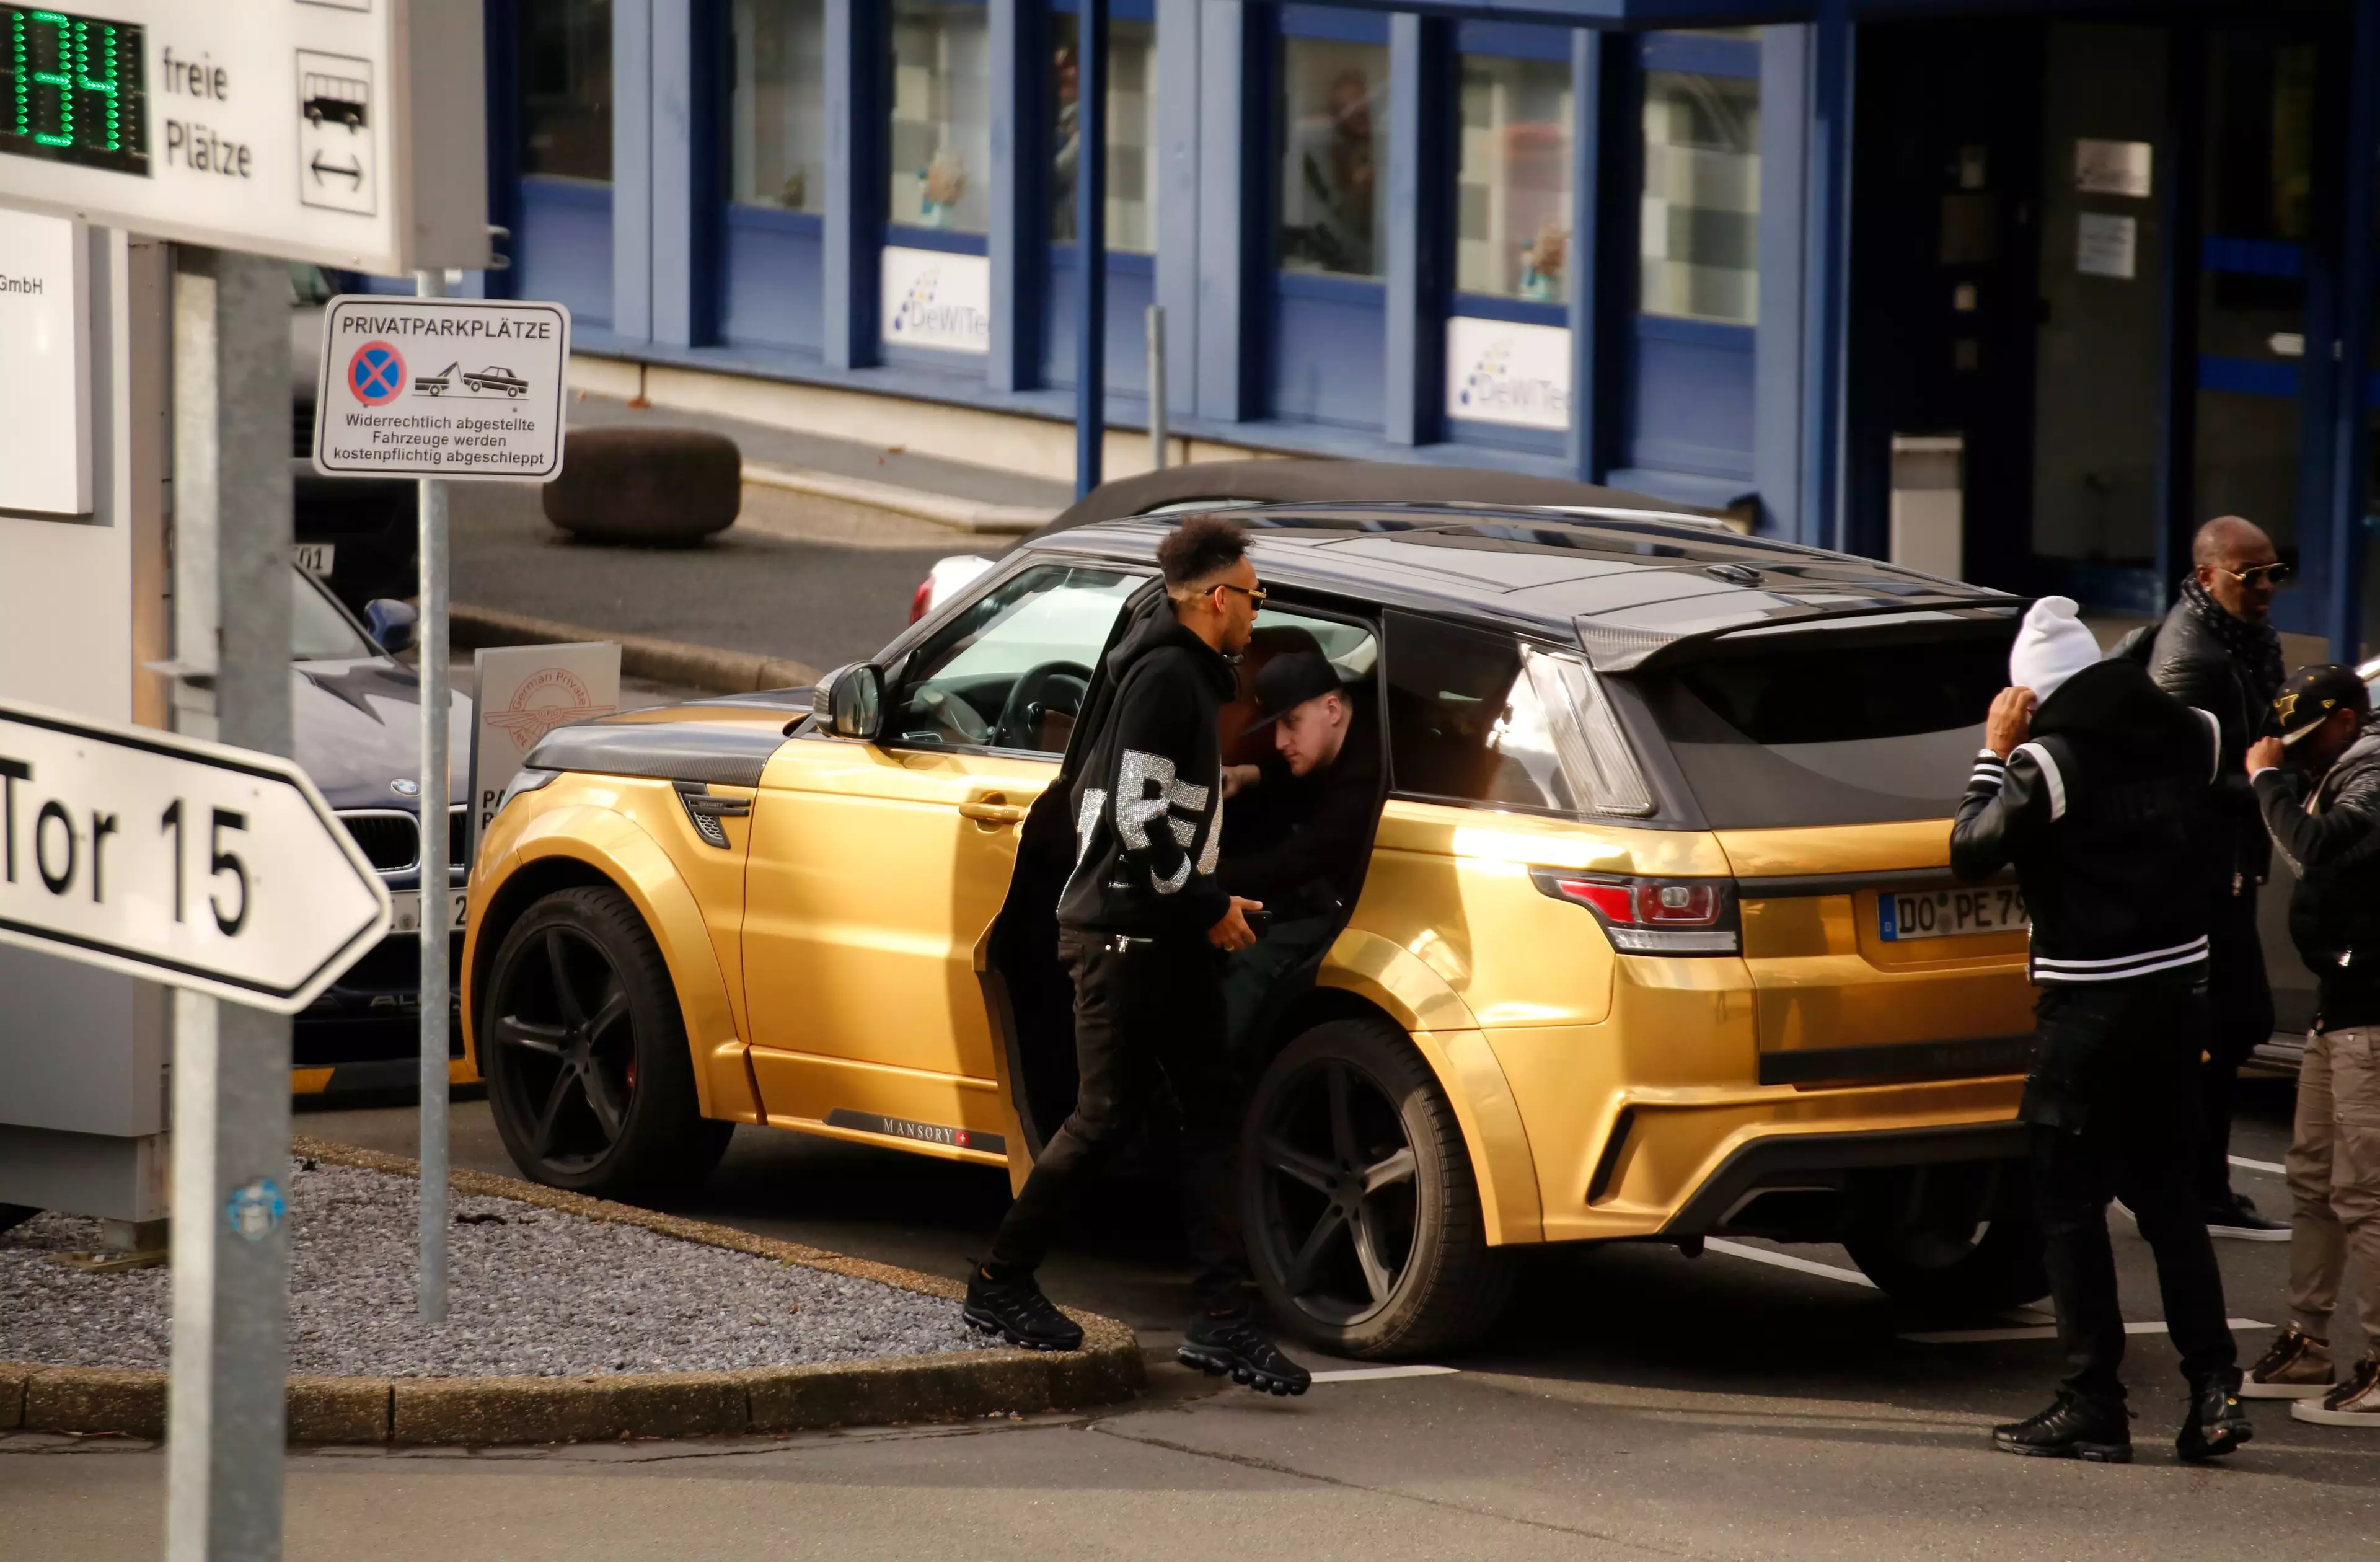 Not wanting to be spotted Aubameyang arrives at Dortmund airport in a gold Range Rover. Image: PA Images.